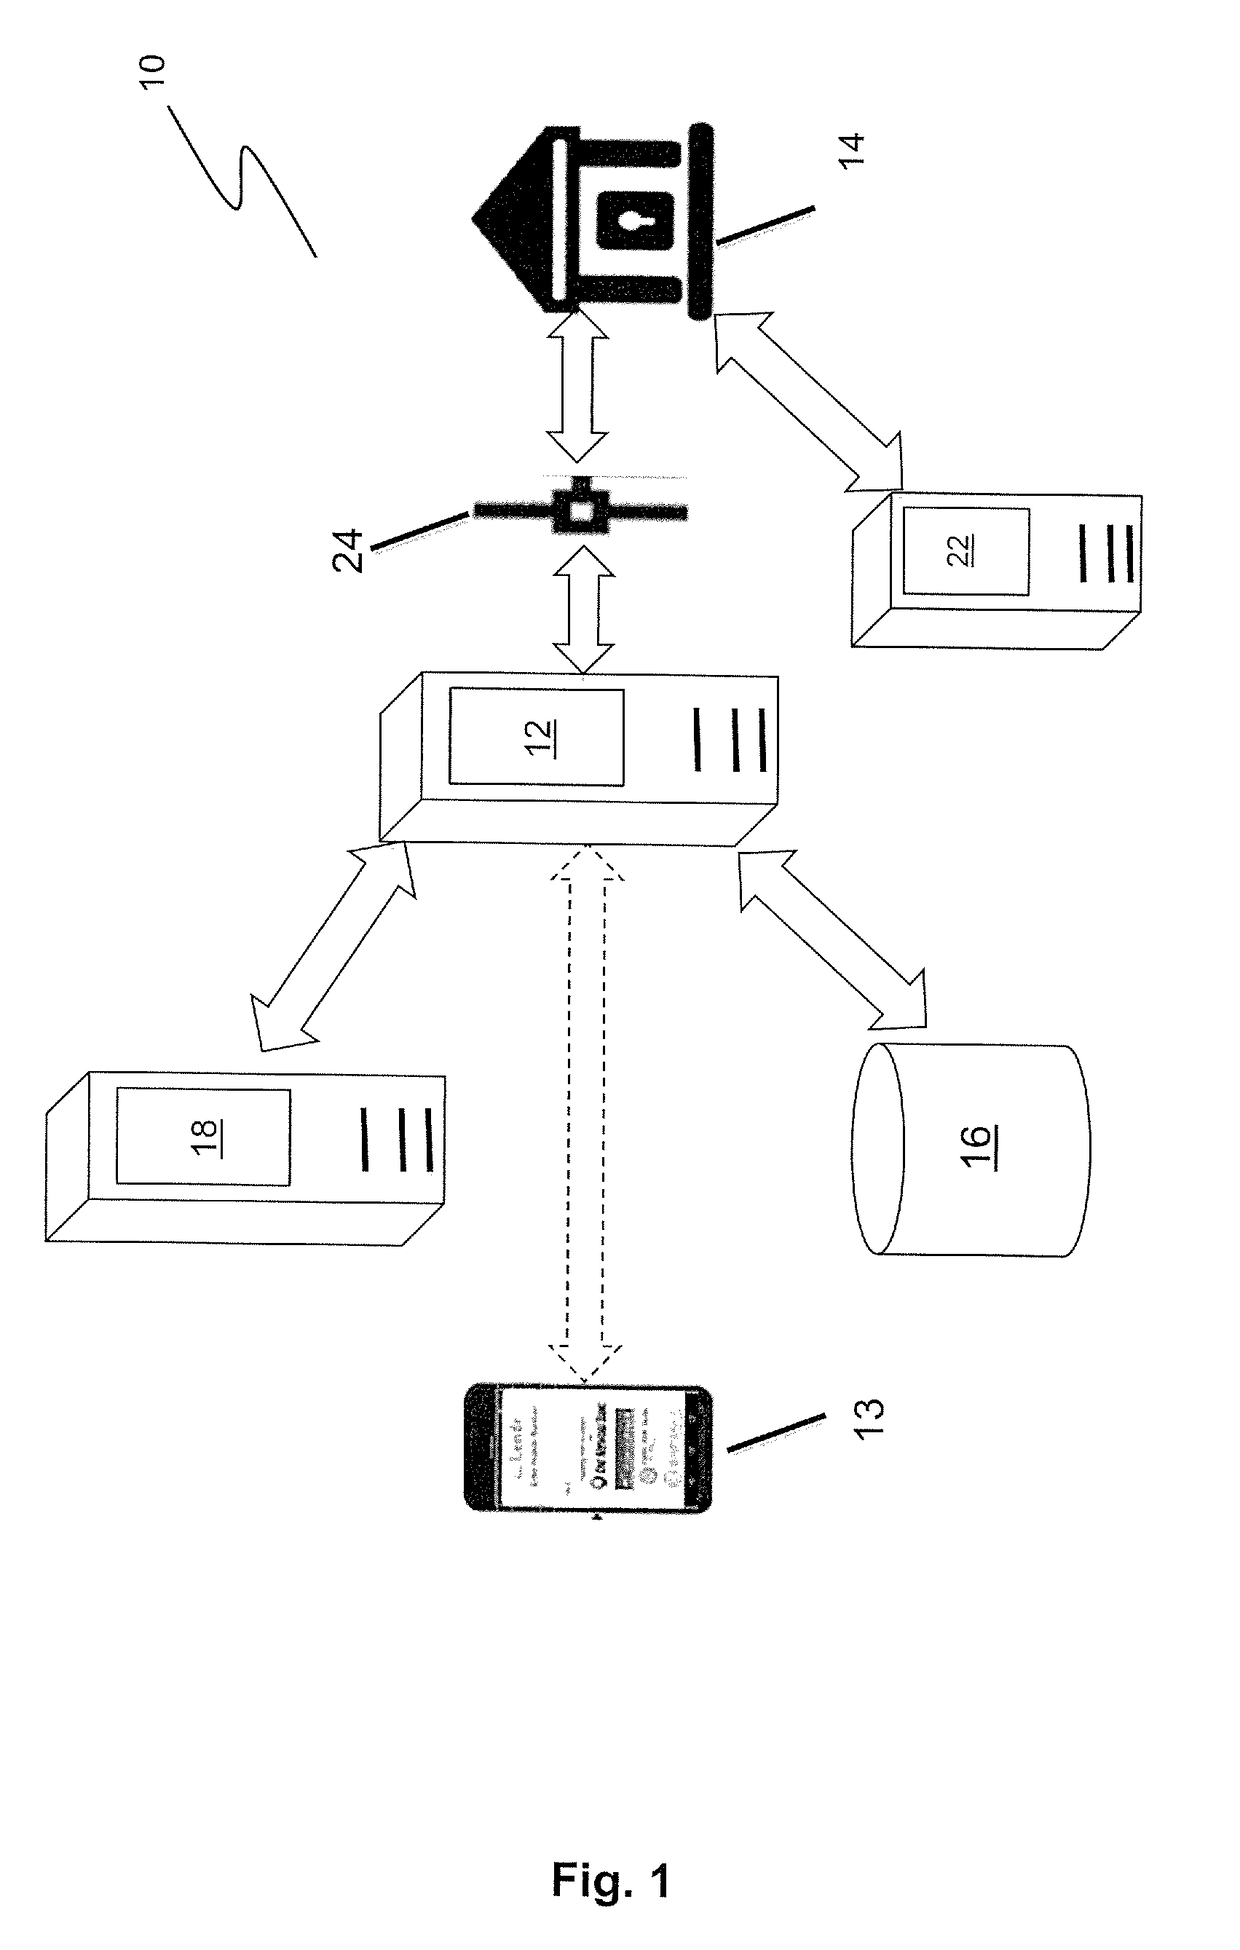 System and method for facilitating electronic transactions